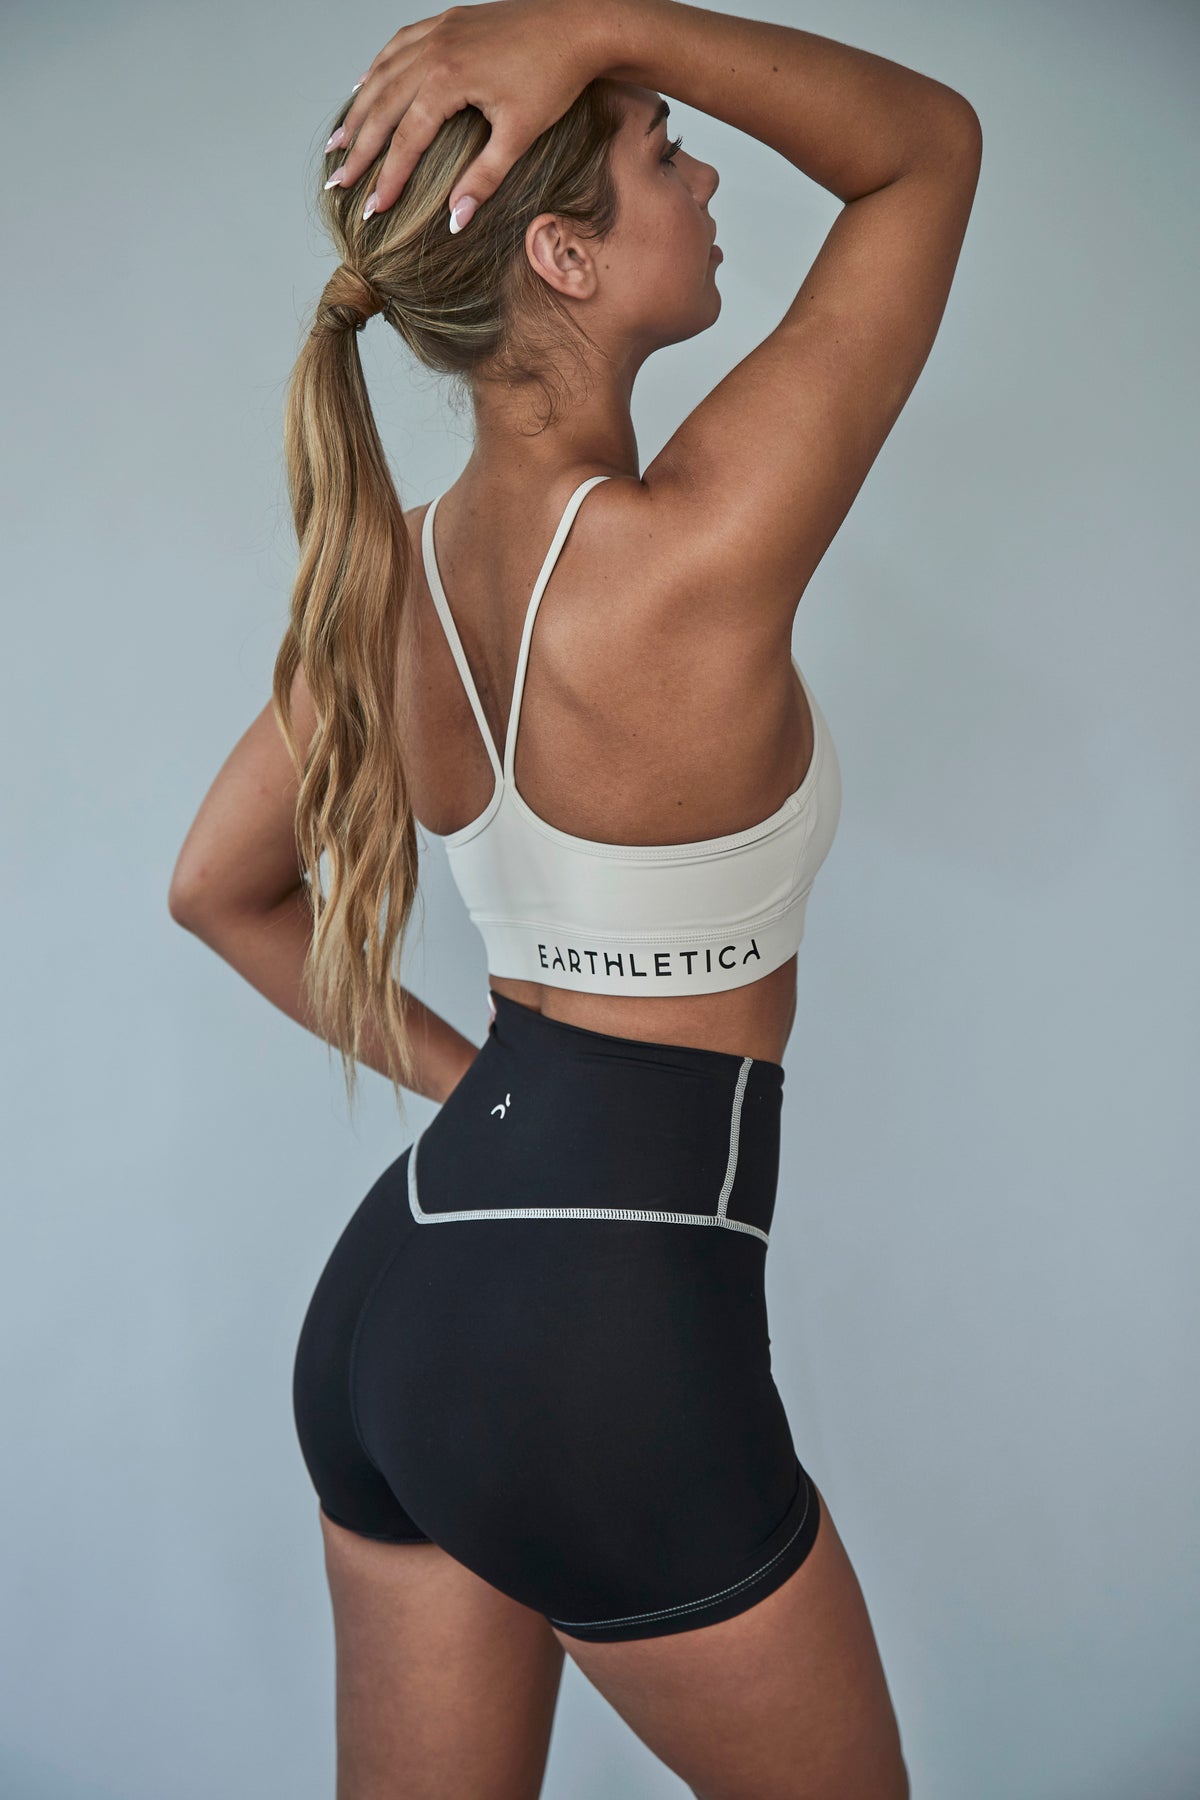 SOLD OUT - White Peppercorn Crop + Truffle Salt Booty Shorts + Oversized Pink Salt Tee